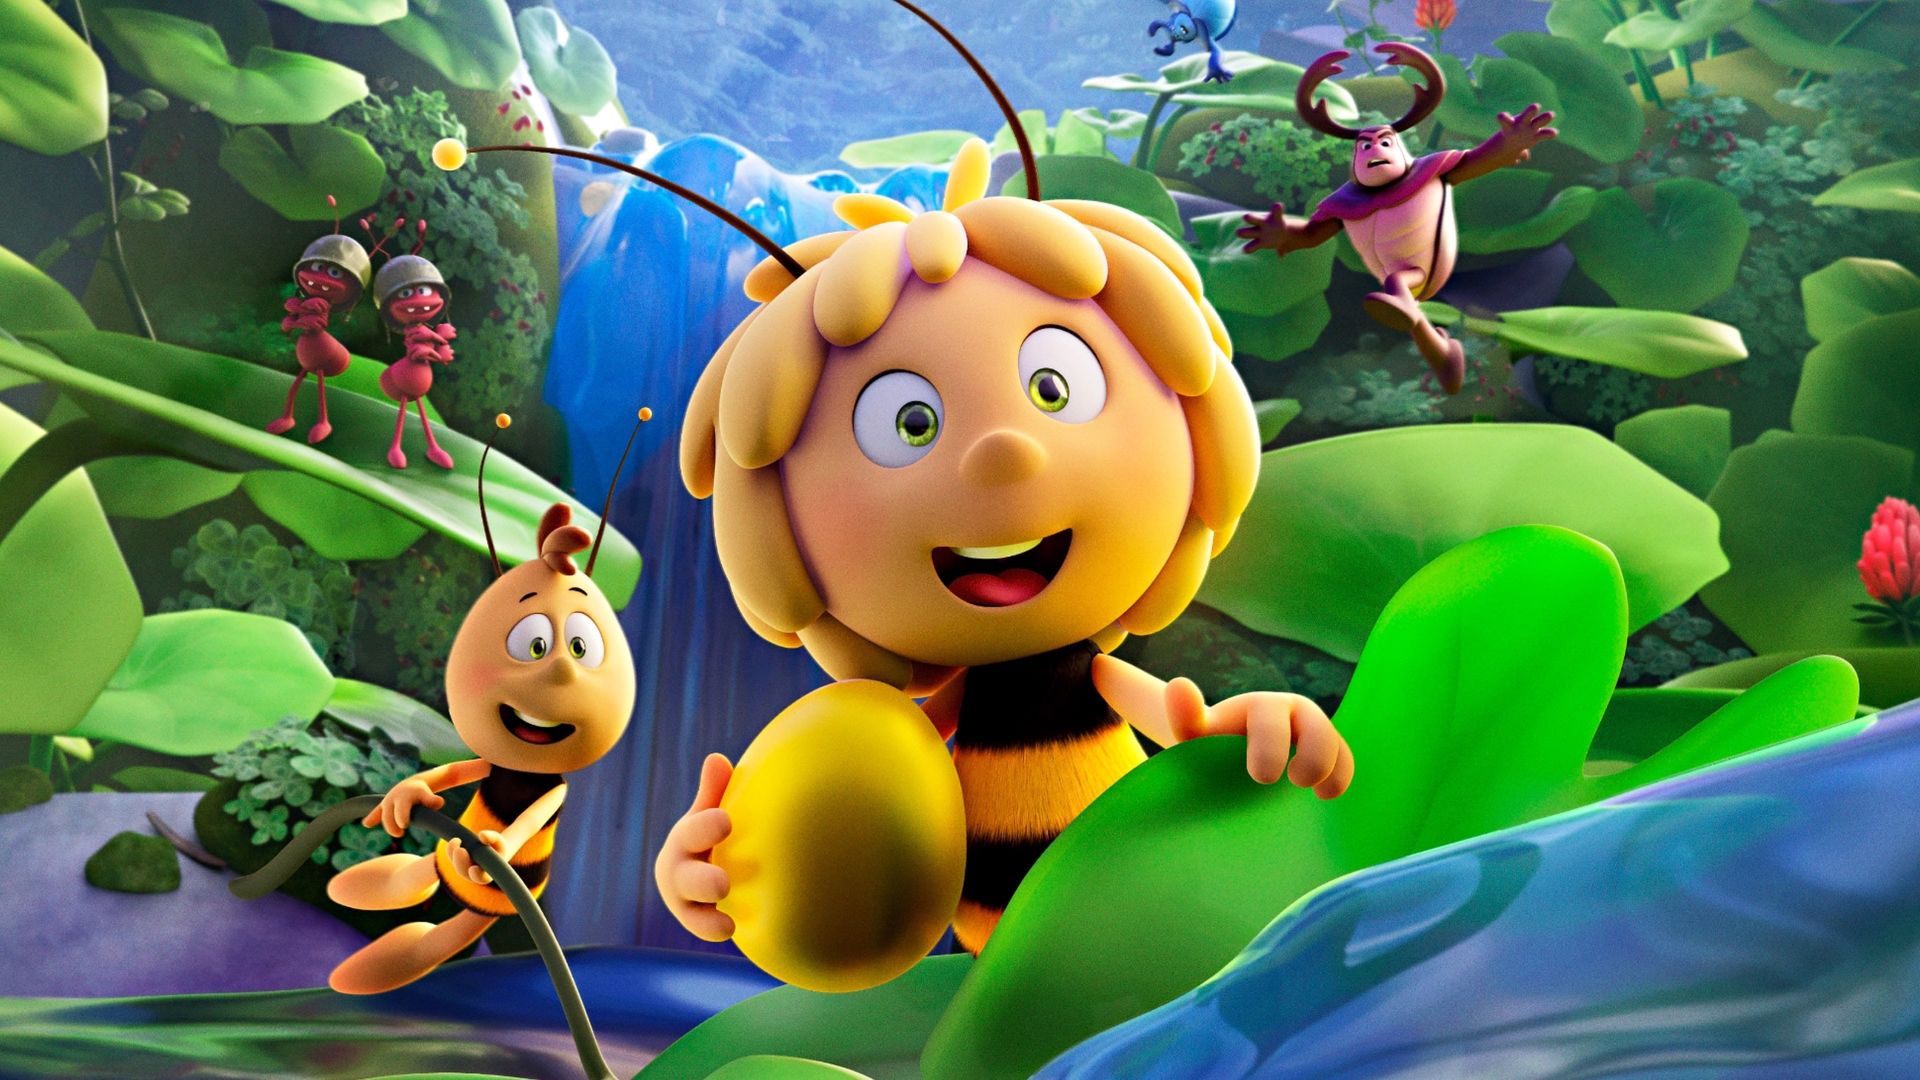 Maya the Bee 3: The Golden Orb background